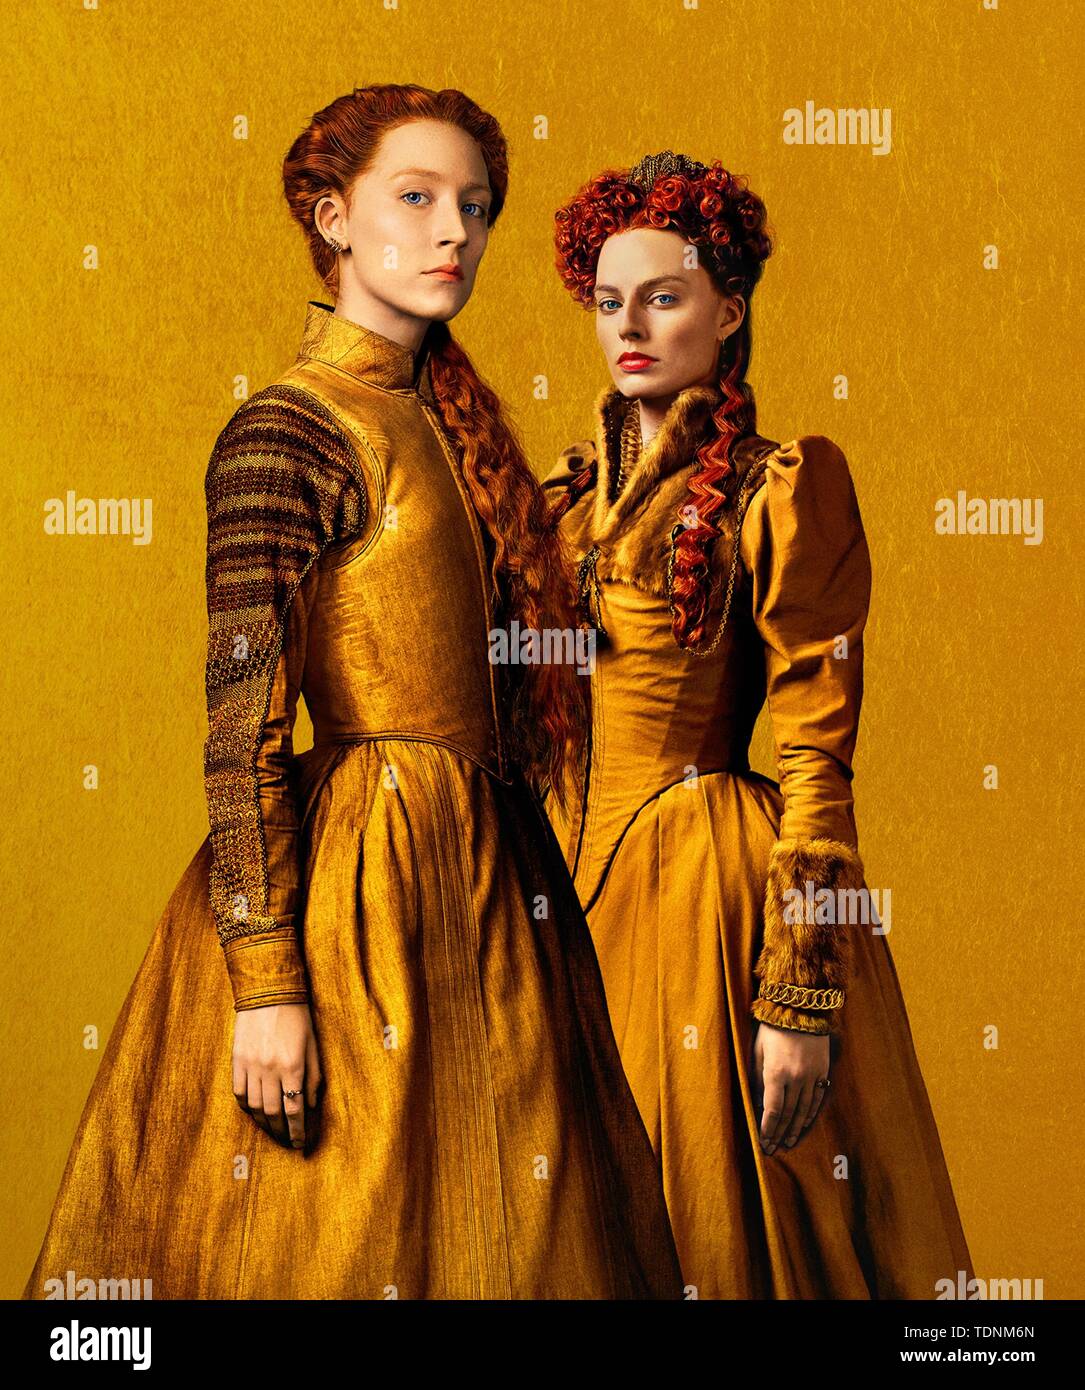 SAOIRSE RONAN and MARGOT ROBBIE in MARY QUEEN OF SCOTS (2018). Credit: FOCUS FEATURES/WORKING TITLE FILMS / Album Stock Photo